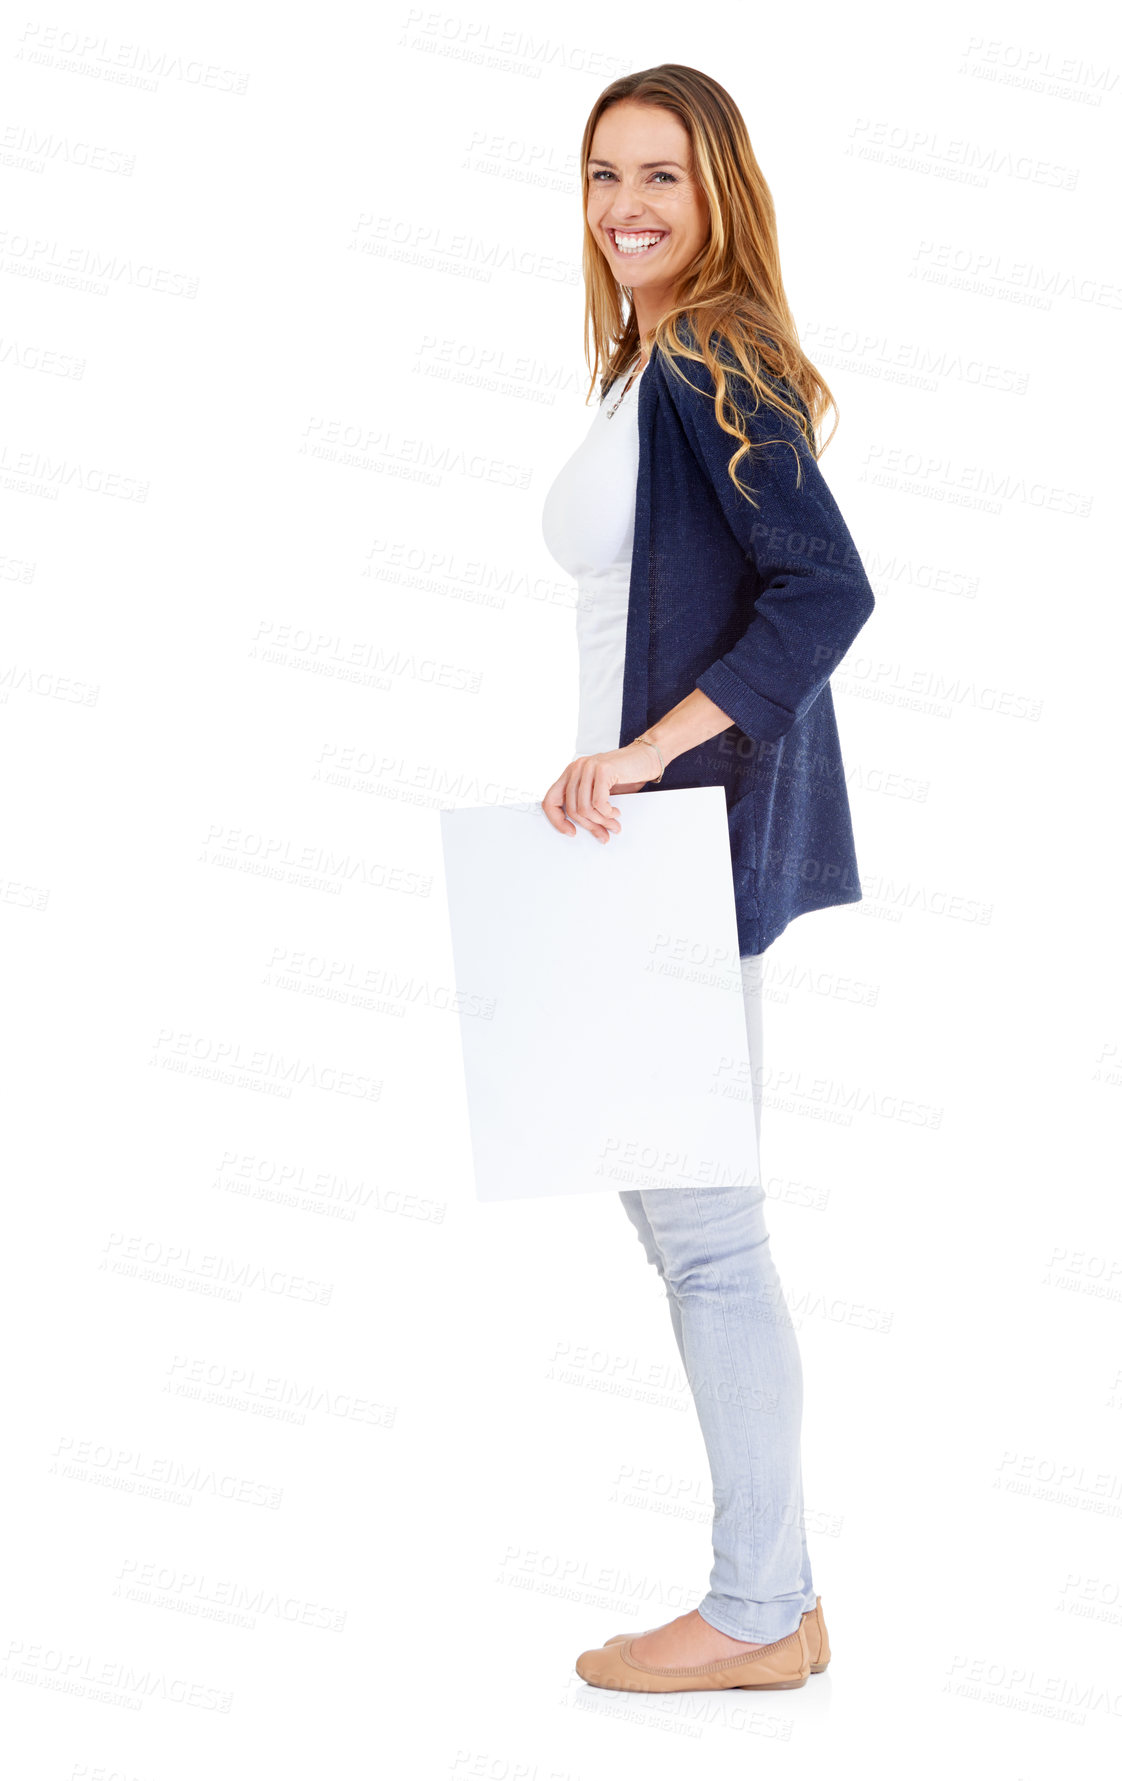 Buy stock photo Studio, blank paper and portrait of happy woman in shock for deal, promo or news mockup. Signage, offer and girl with smile for announcement, opportunity or info on cardboard with white background.